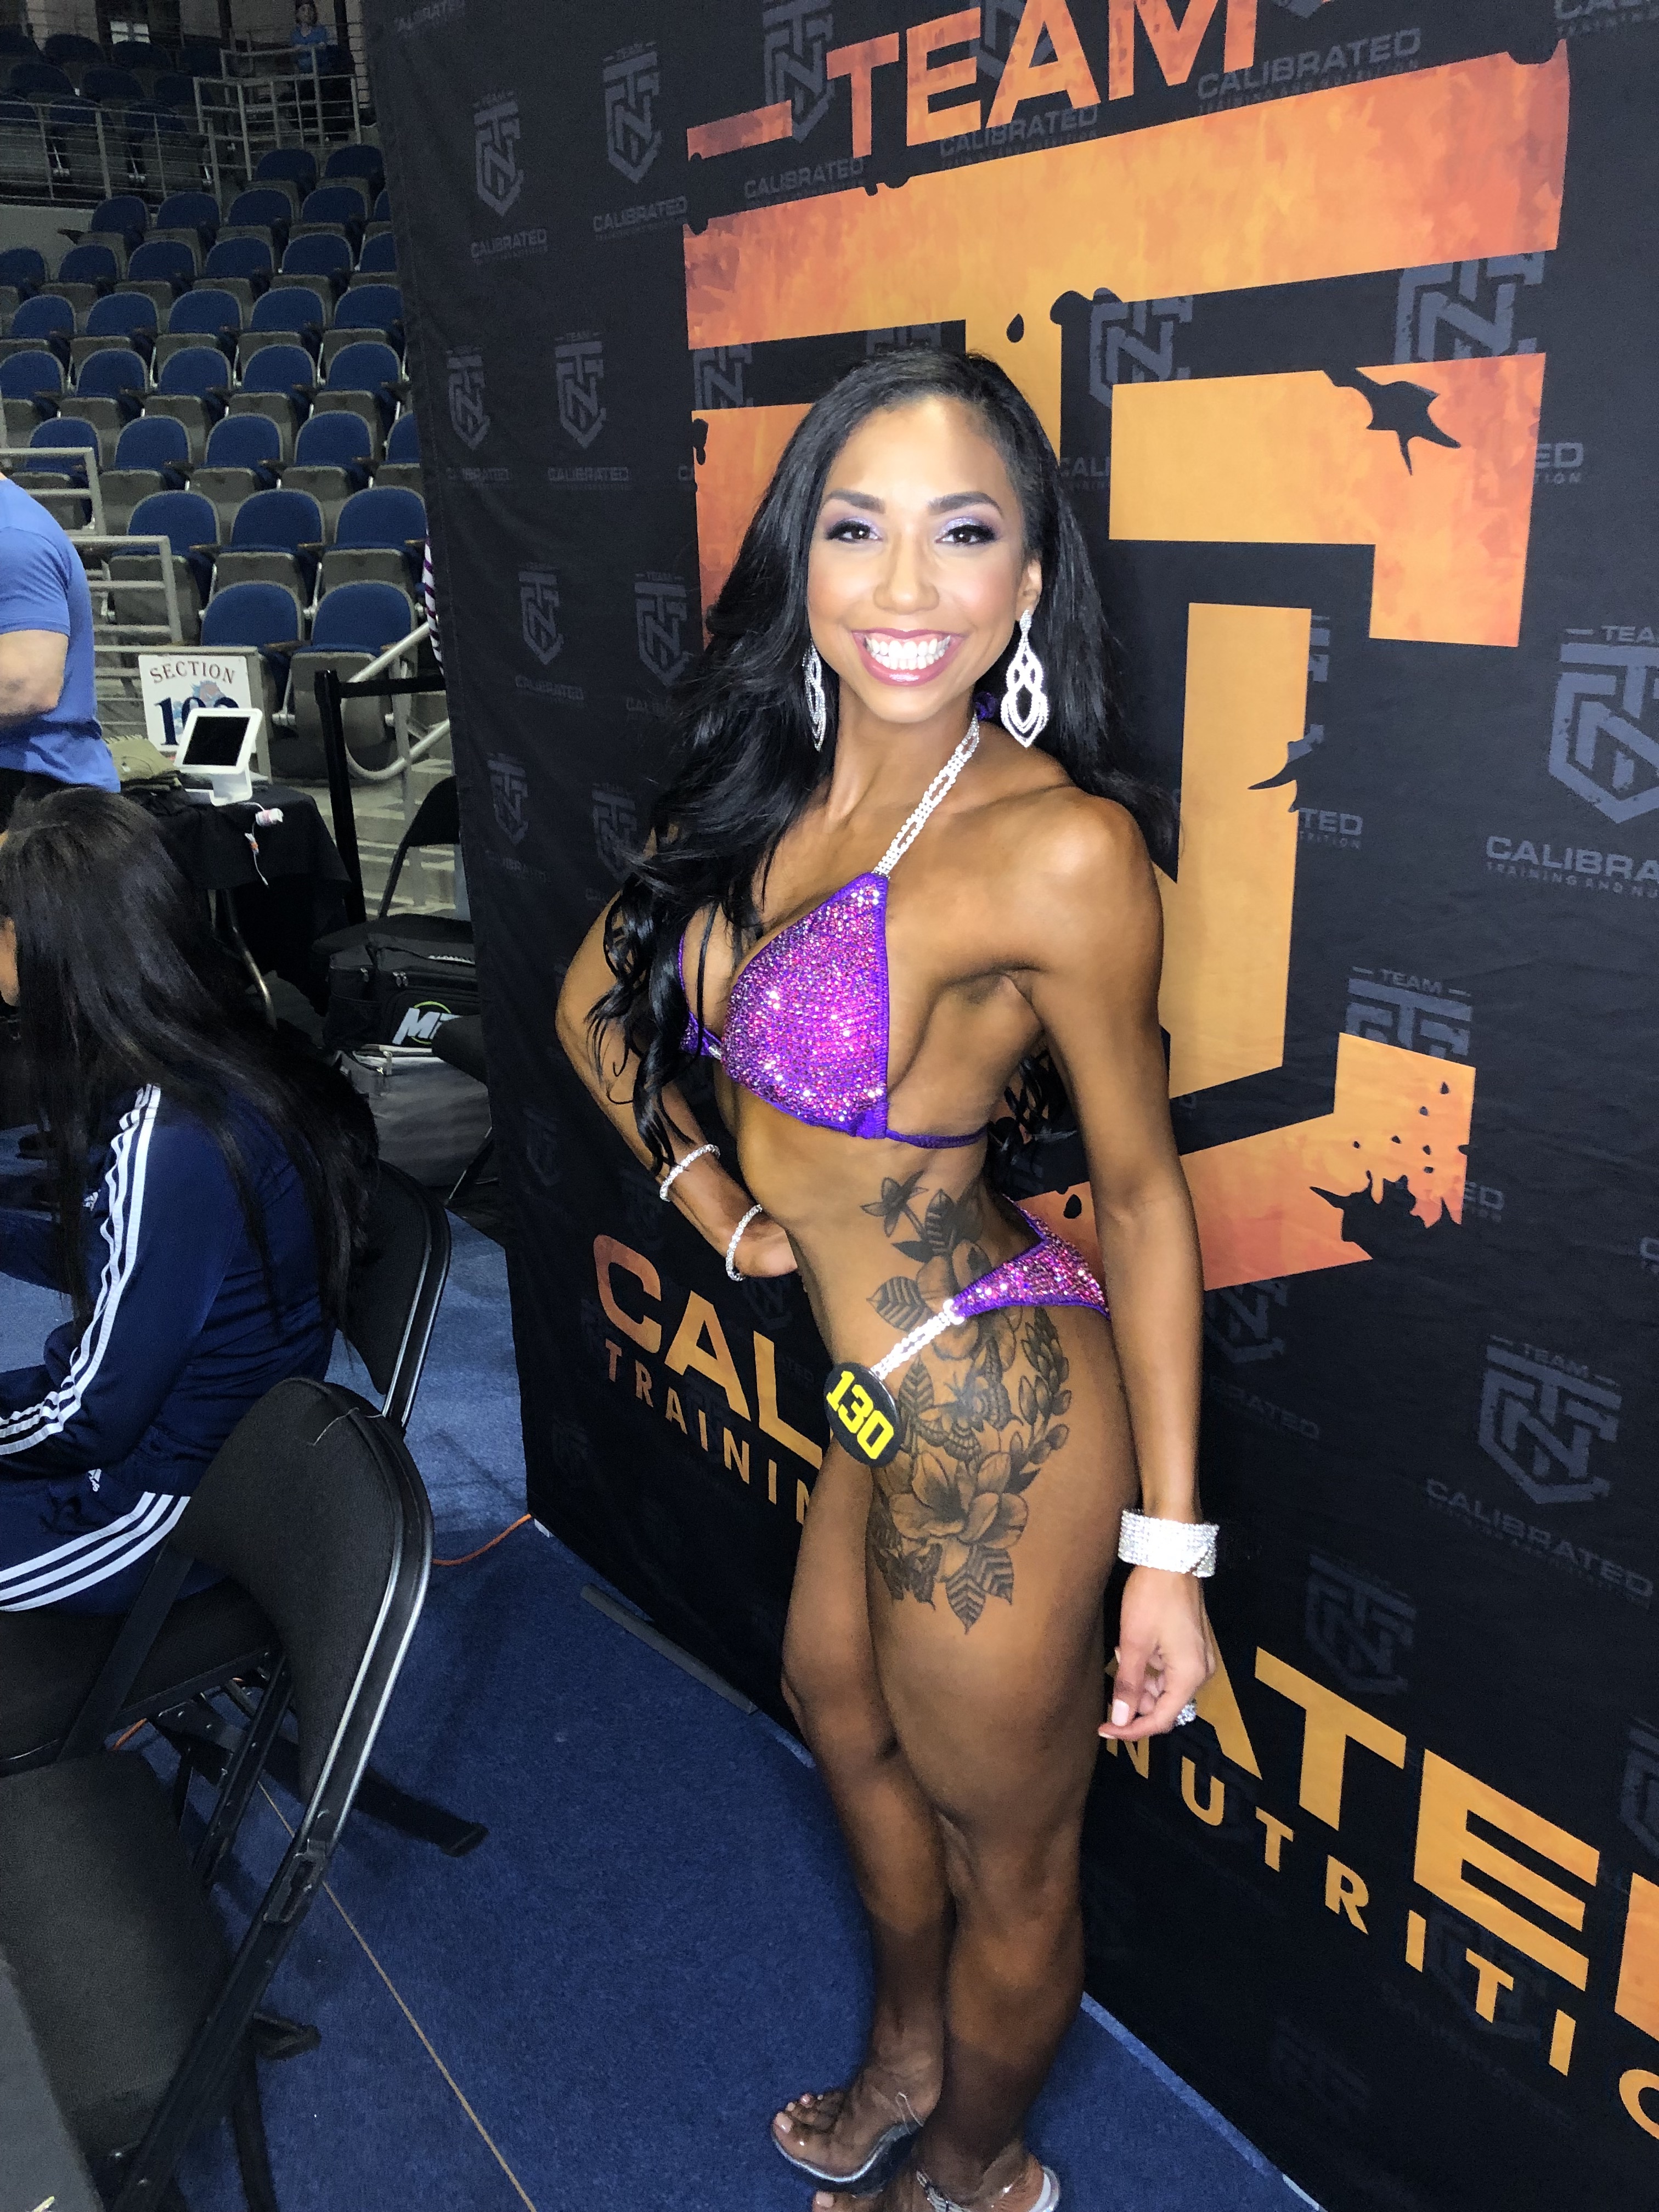 #130 at my first NPC Bikini Competition - Class A Division